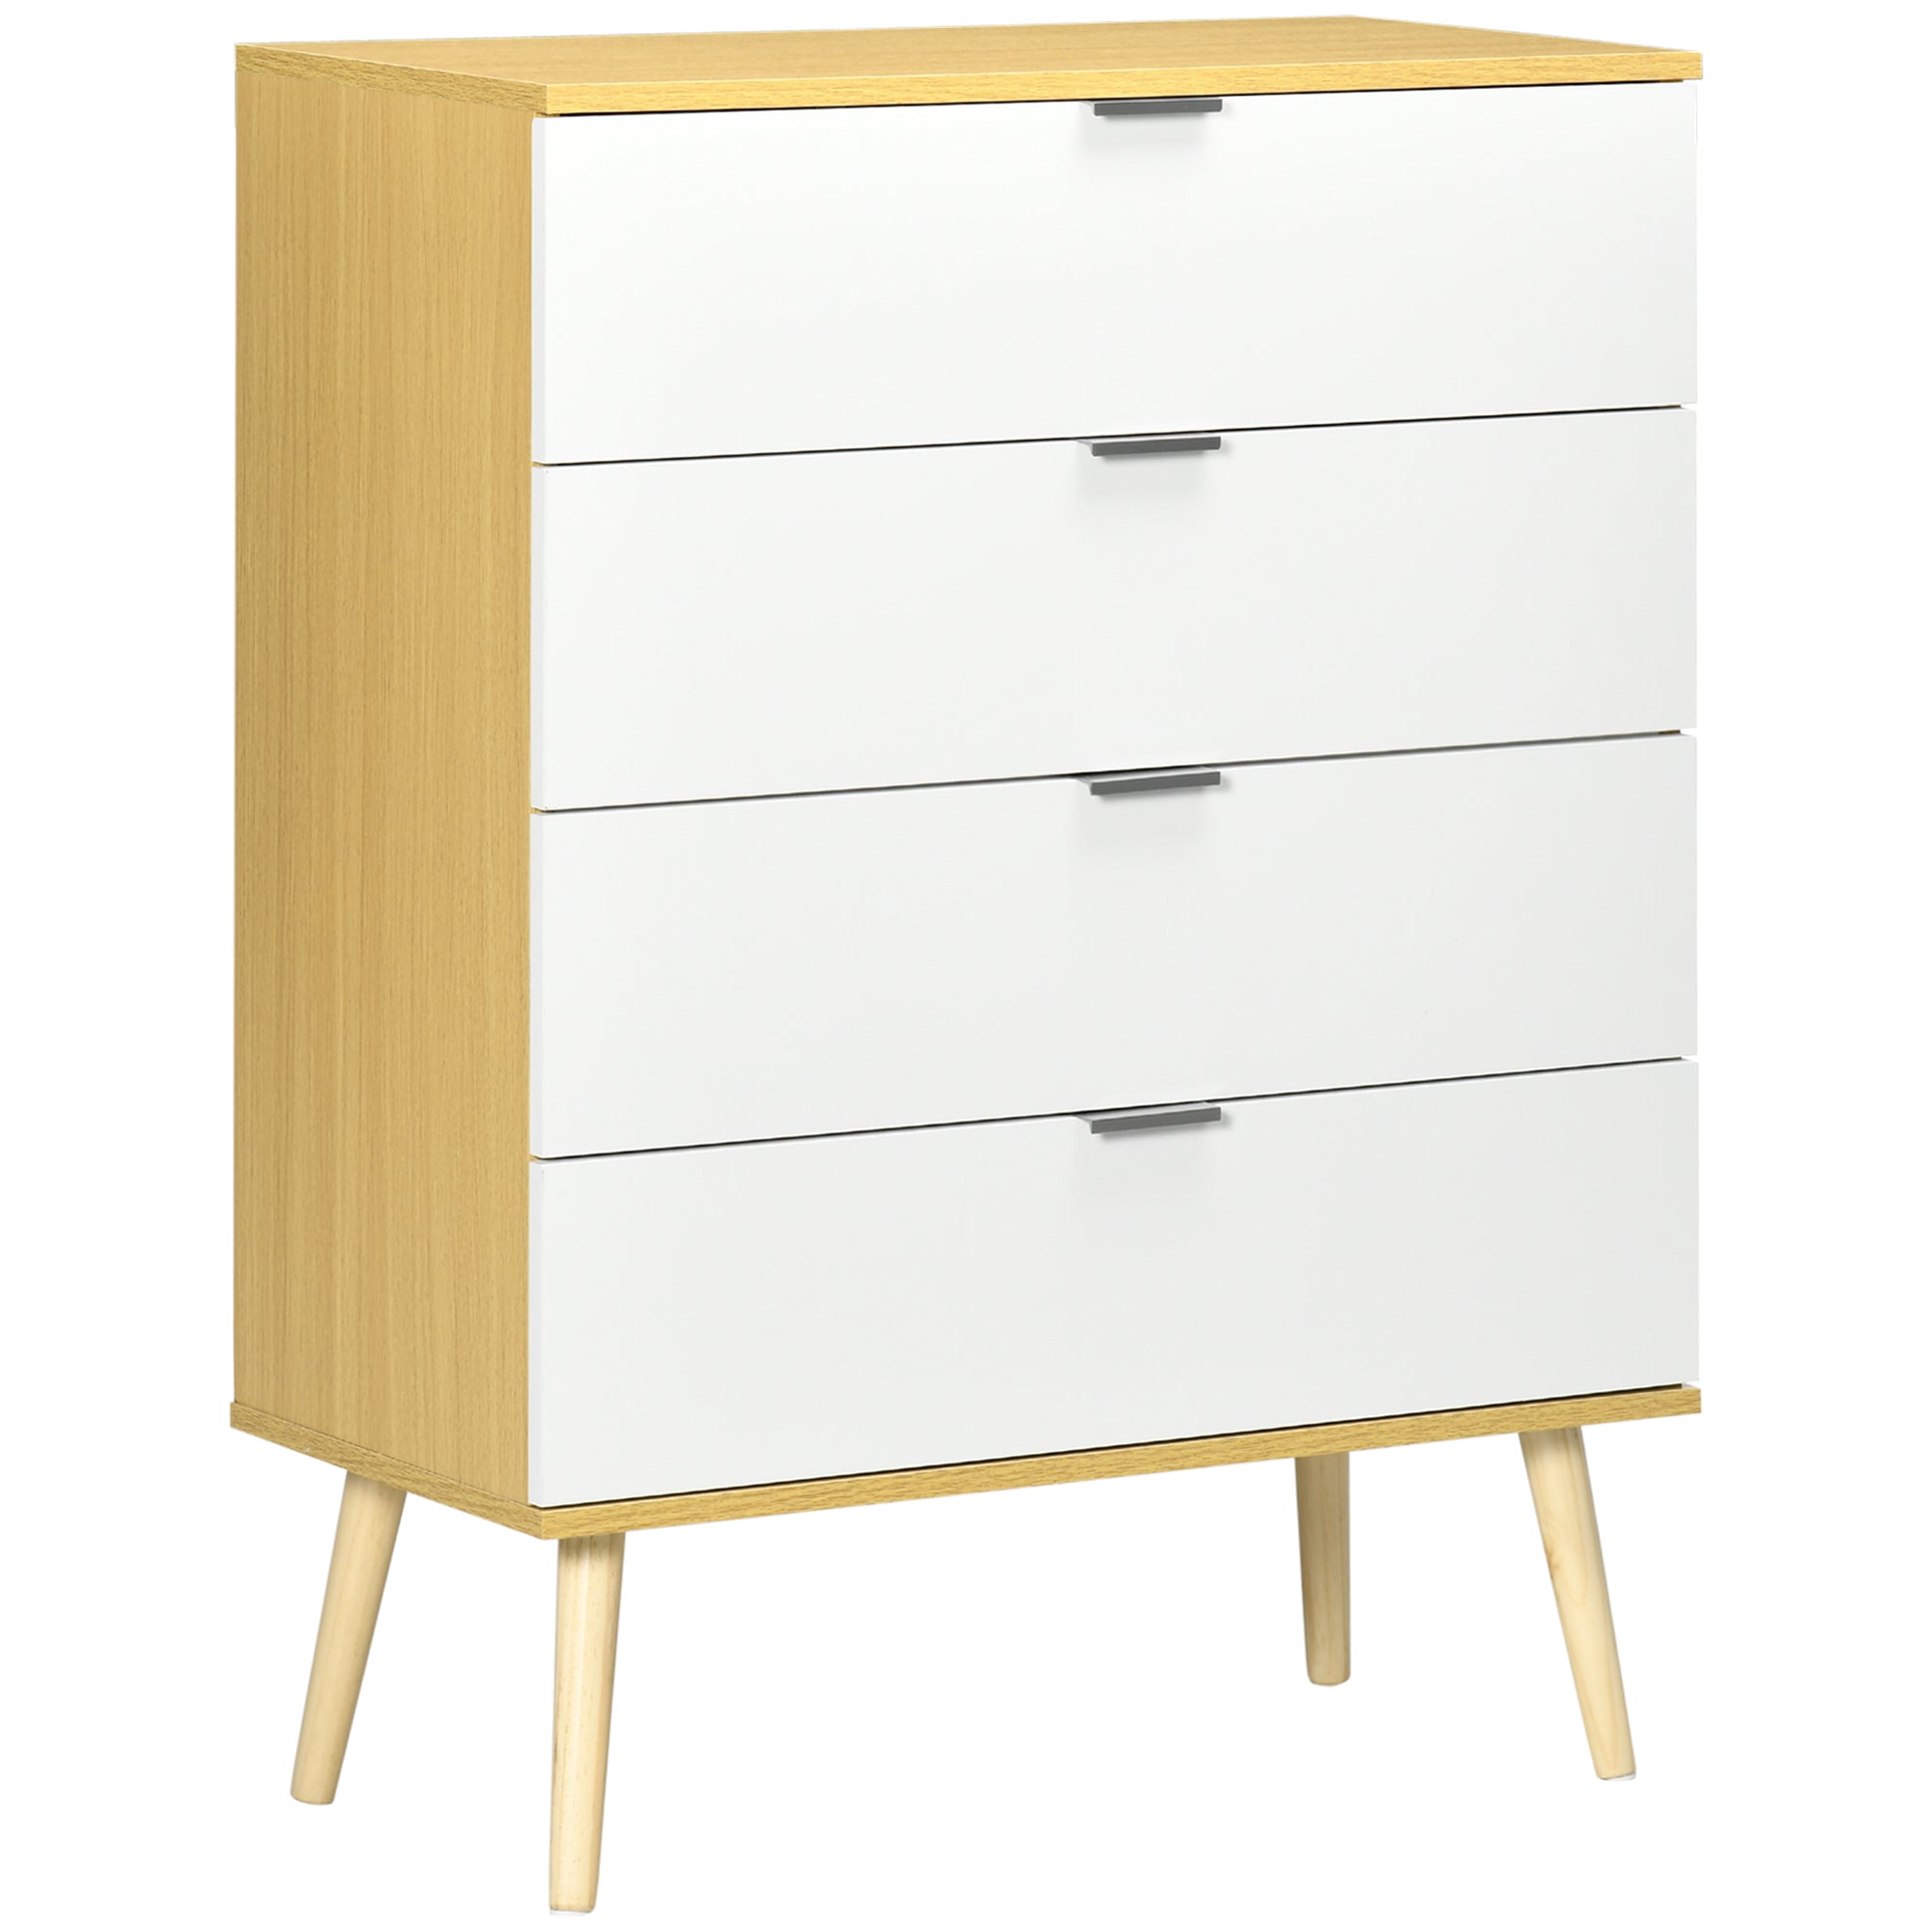 HOMCOM Chest of Drawers - 4 Drawer Unit Storage Cabinet - White and Natural  | TJ Hughes